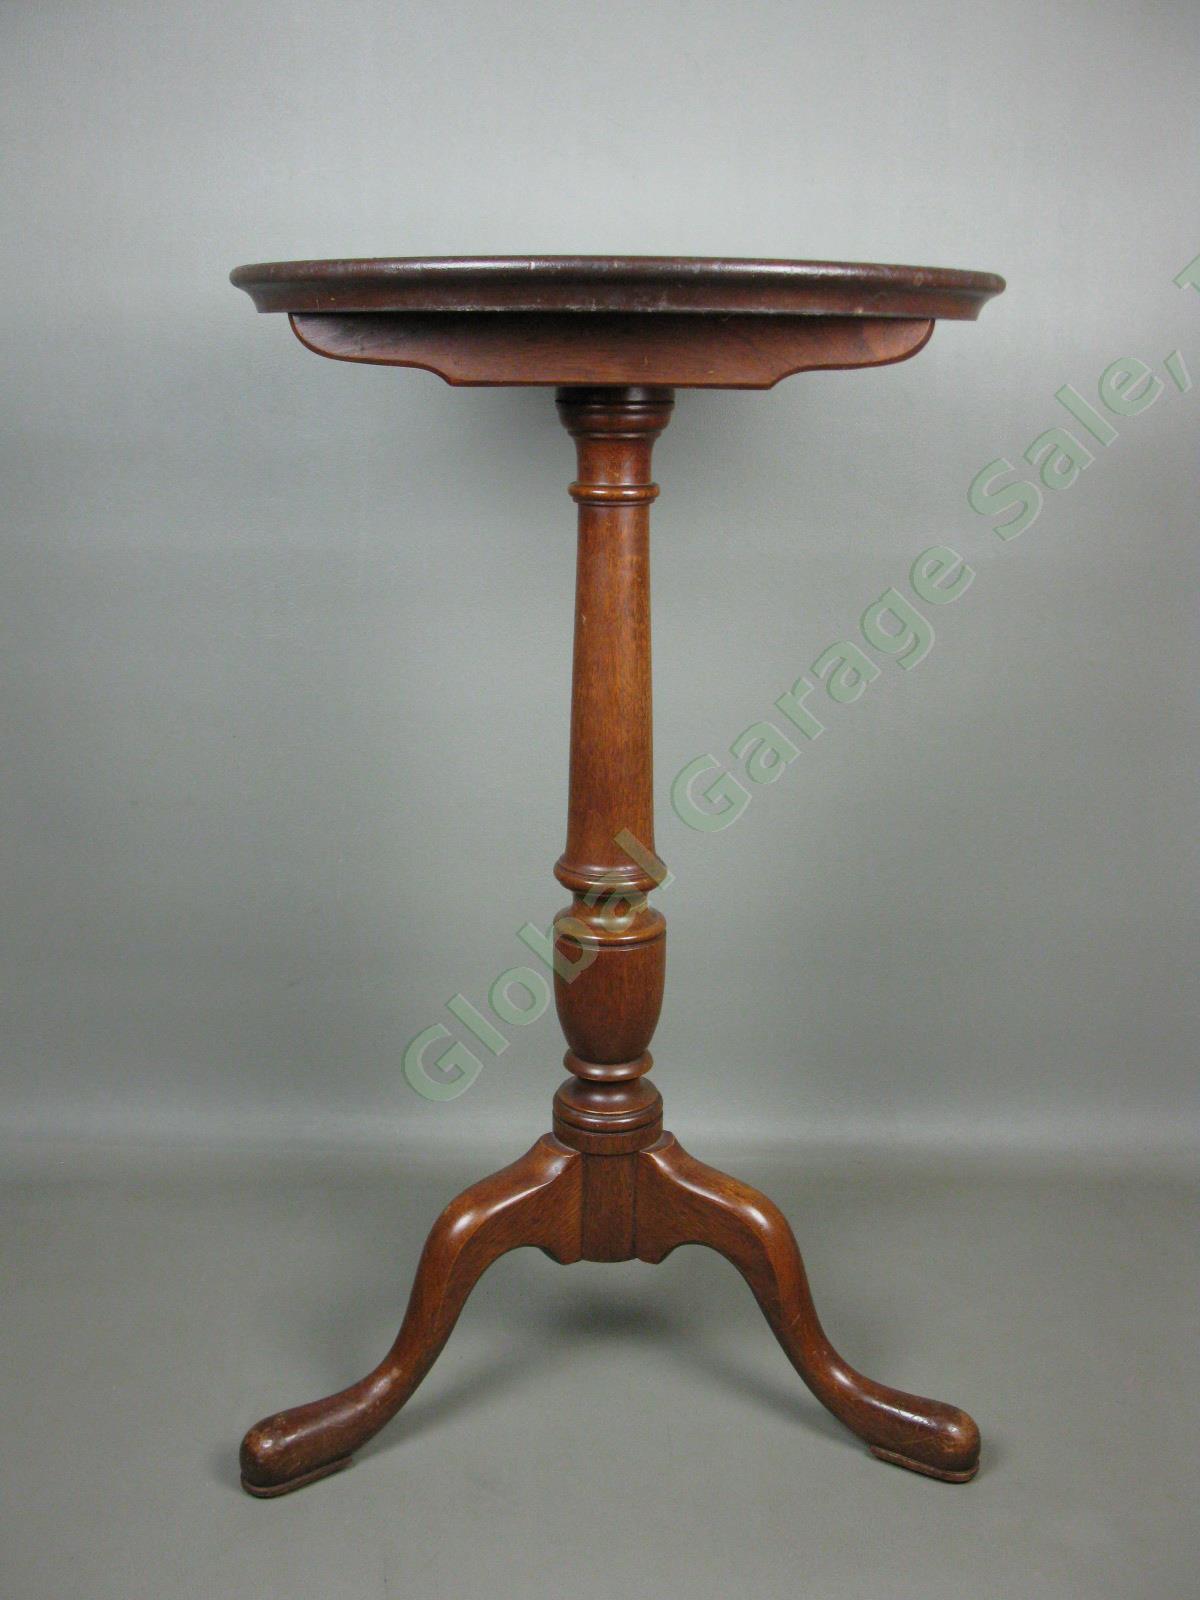 Vtg Biggs Furniture Virginia Mahogany Center Spindle Candle Stand Table 25" x15" 1